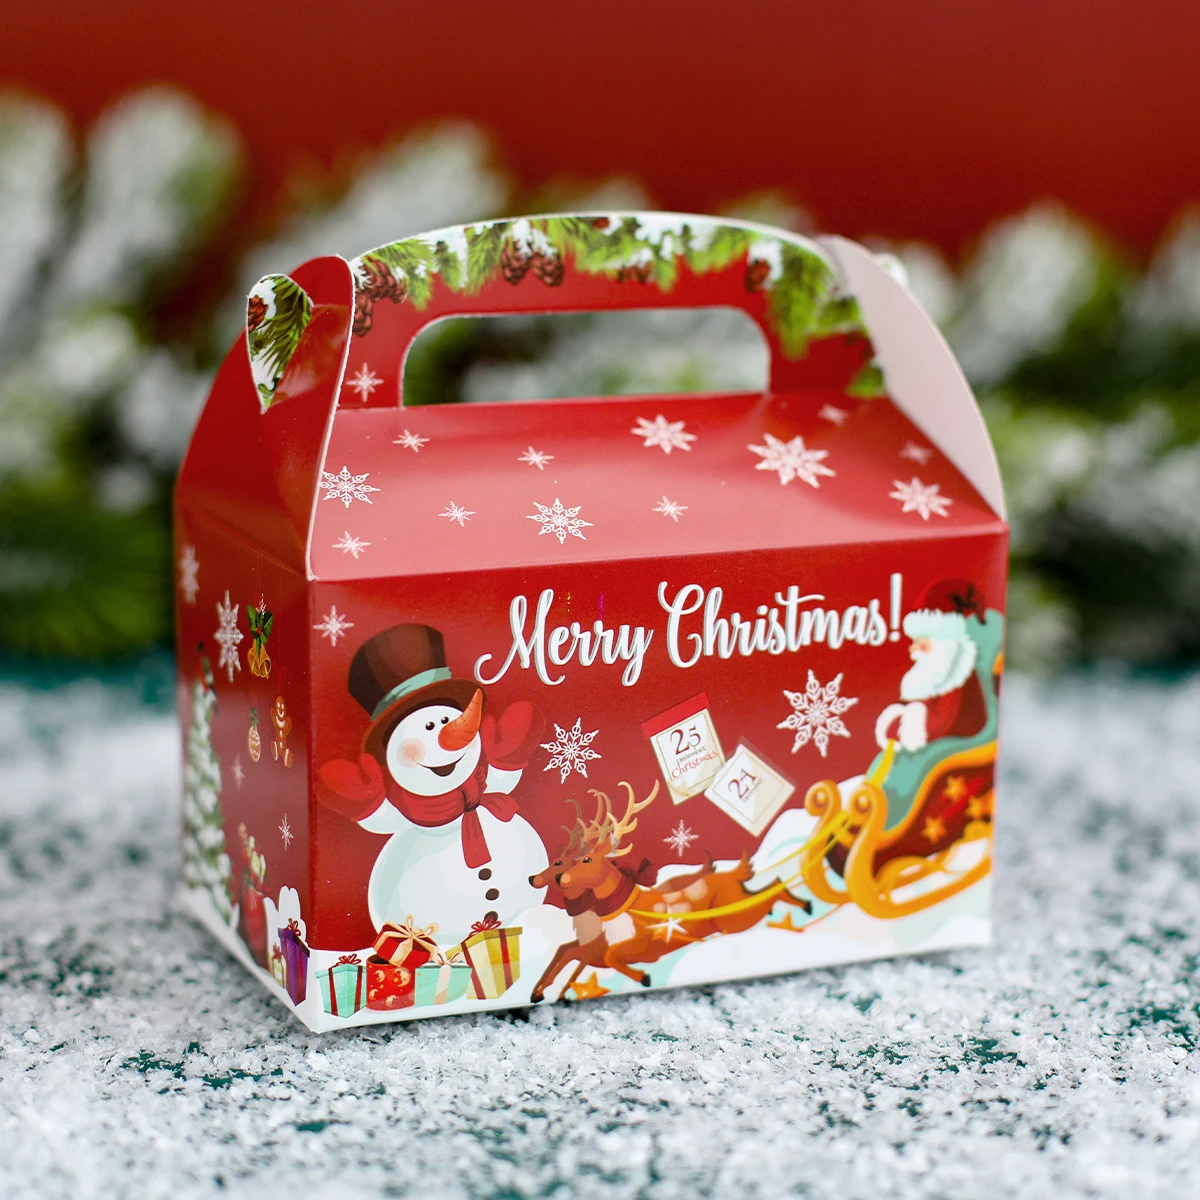 https://ae01.alicdn.com/kf/See40618c0d6144e3a8abeb136a822ecbq/2023-Christmas-Gift-Box-Santa-Claus-Candy-Box-for-Kids-Christmas-Decorations-For-Home-Party-Favors.jpg